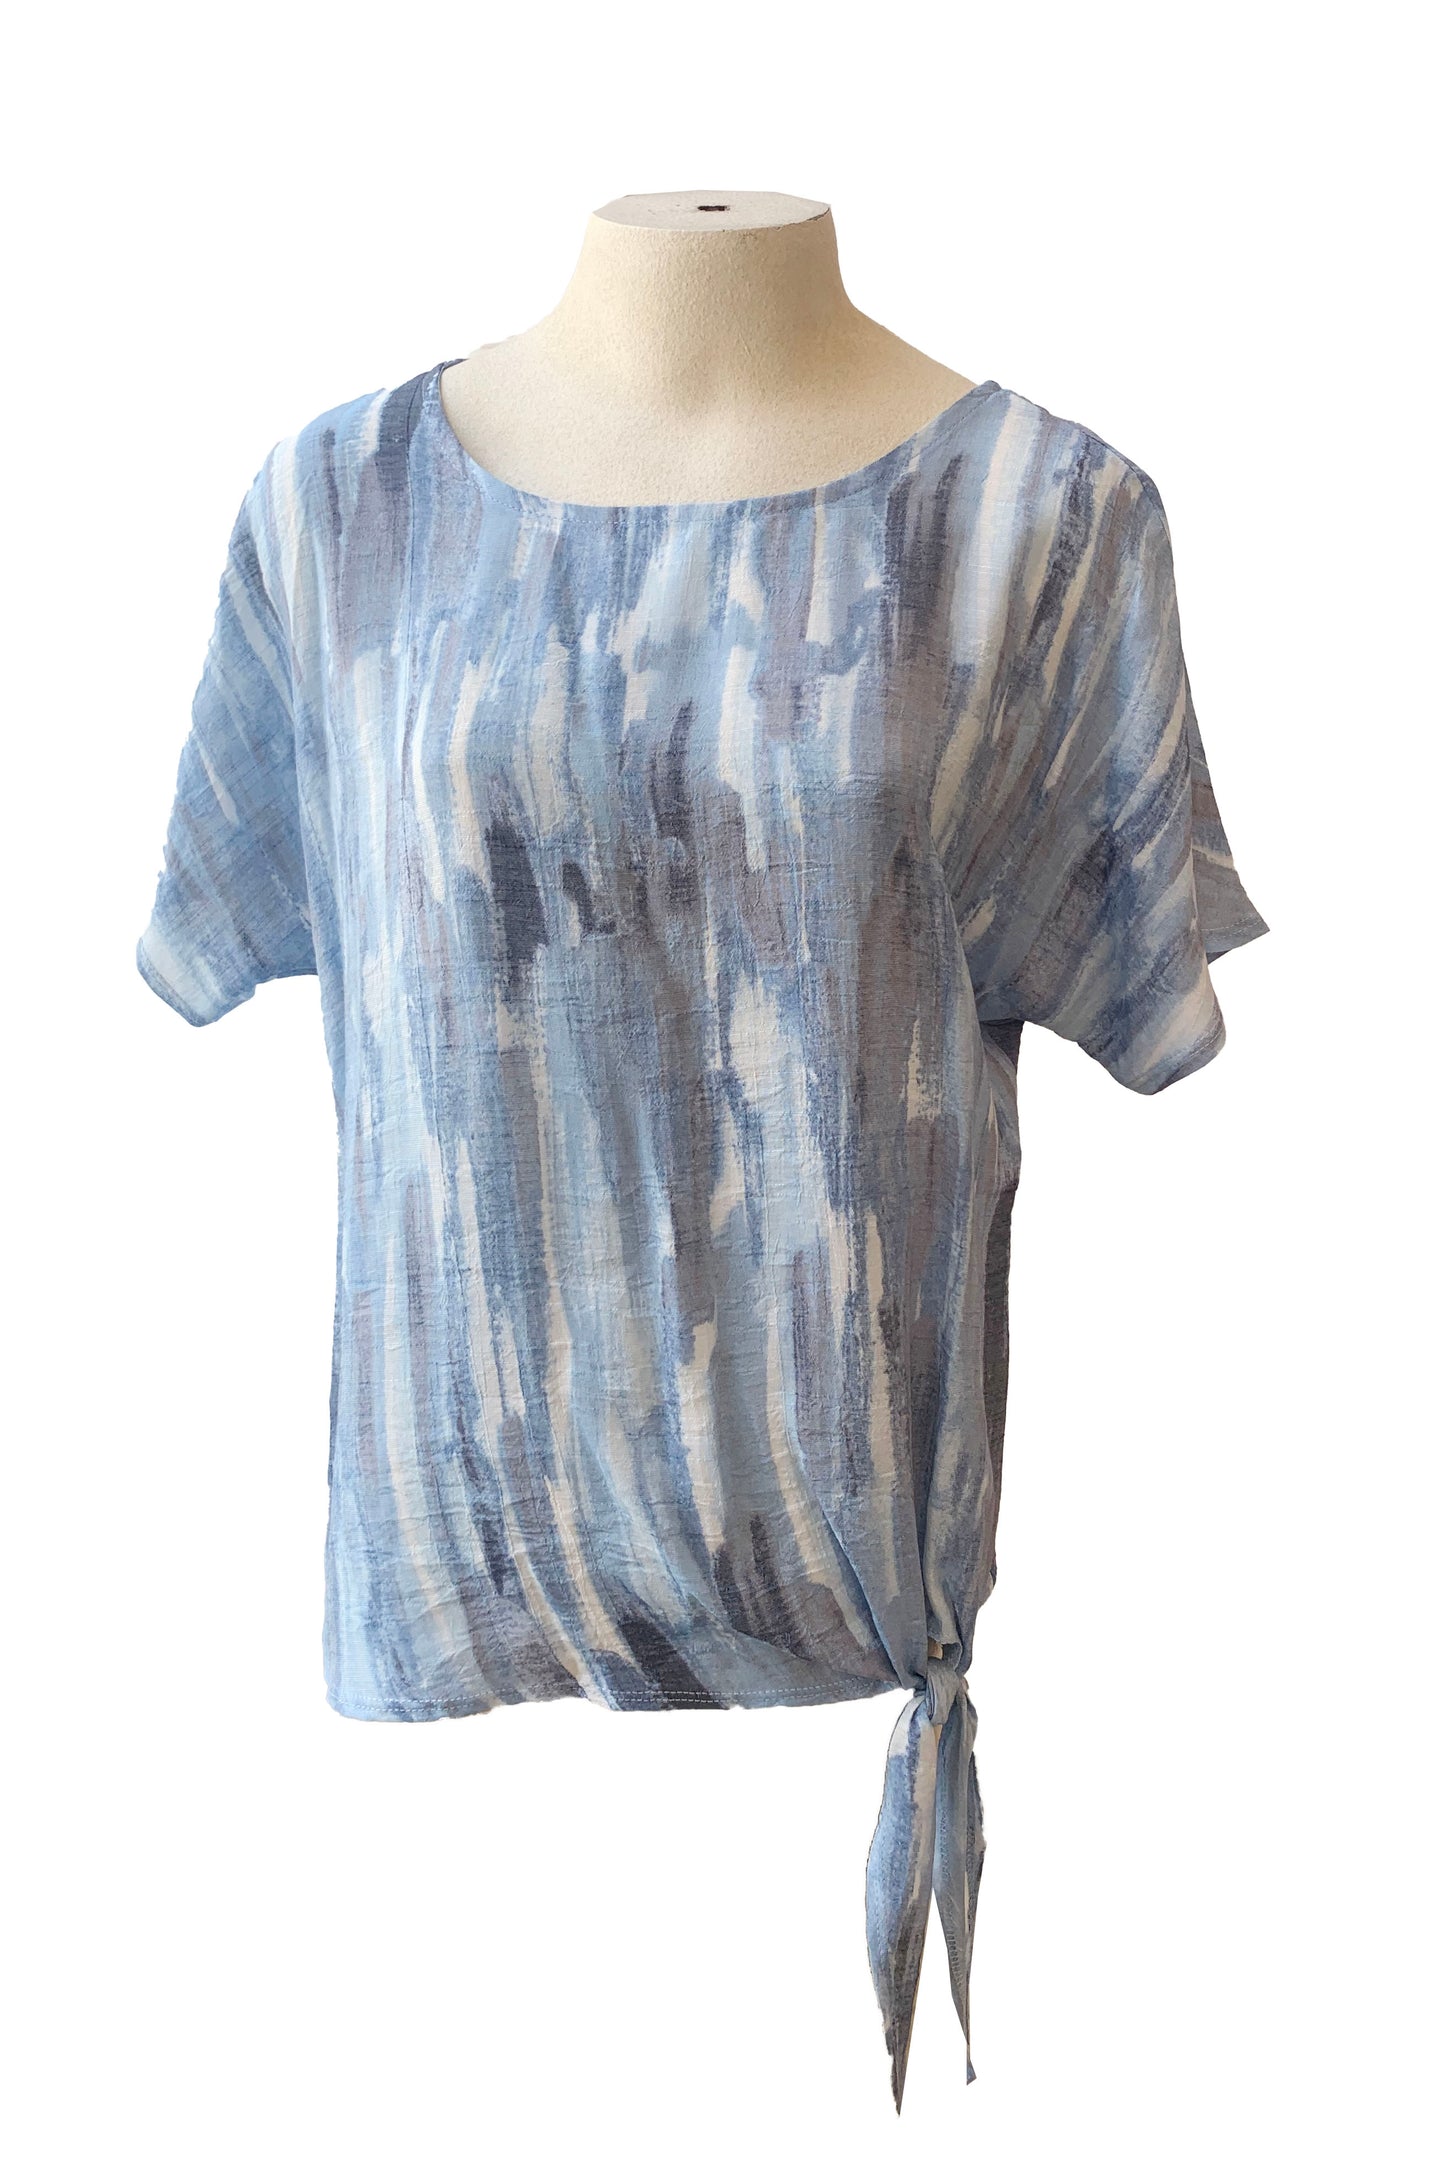 The Chanelle Top by Pure Essence in Sky/Blue is shown on a mannequin in front of a white background